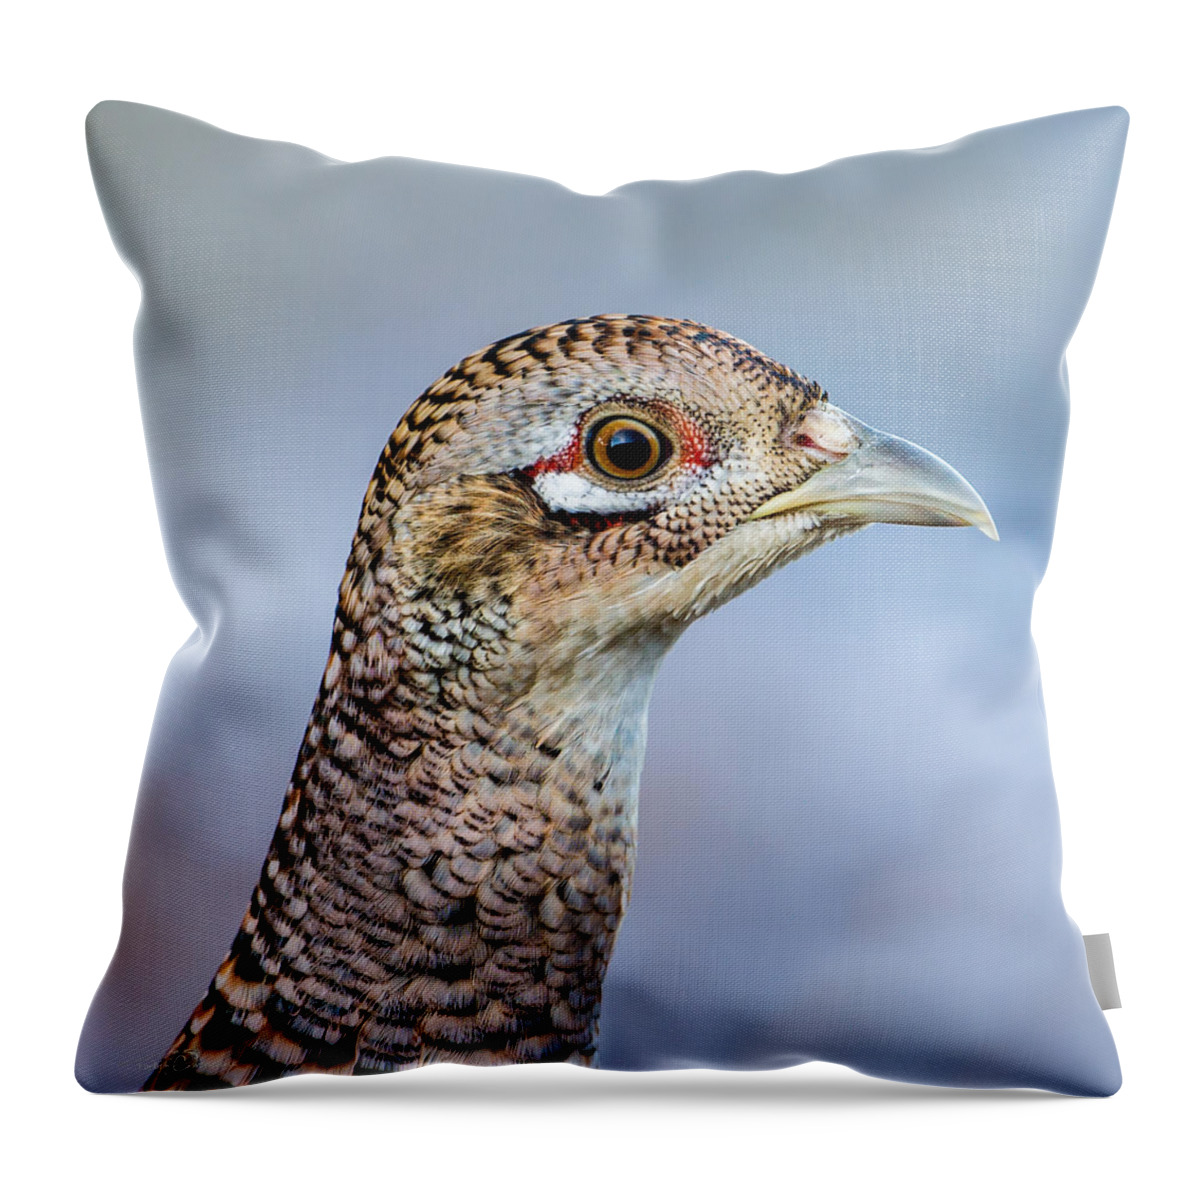 Pheasant Hen Throw Pillow featuring the photograph Pheasant Hen by Torbjorn Swenelius